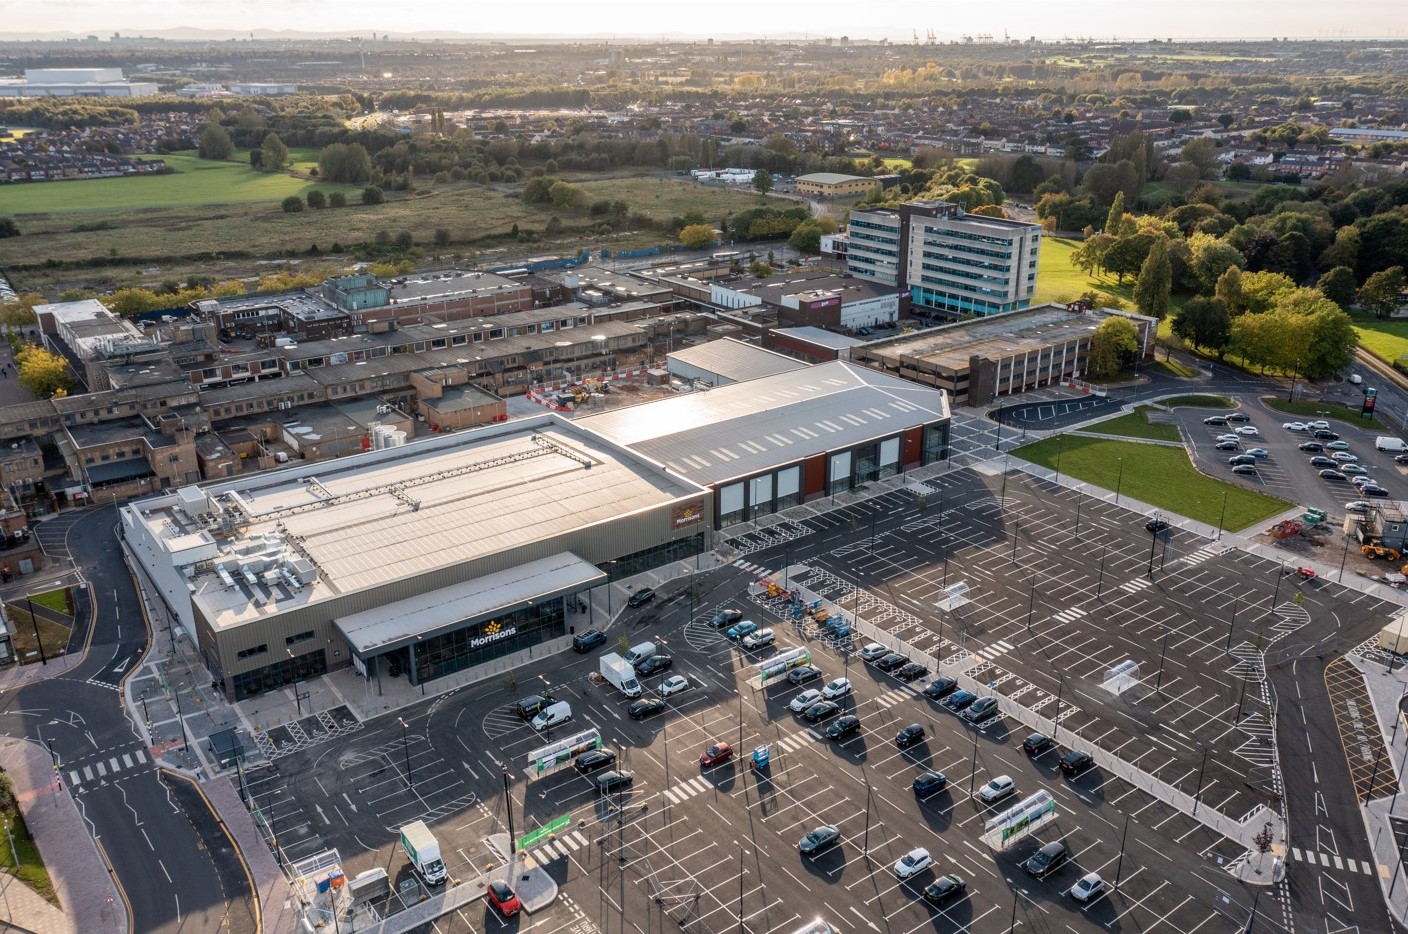 Aerial view of a large detached Morrisons superstore with a car park in front